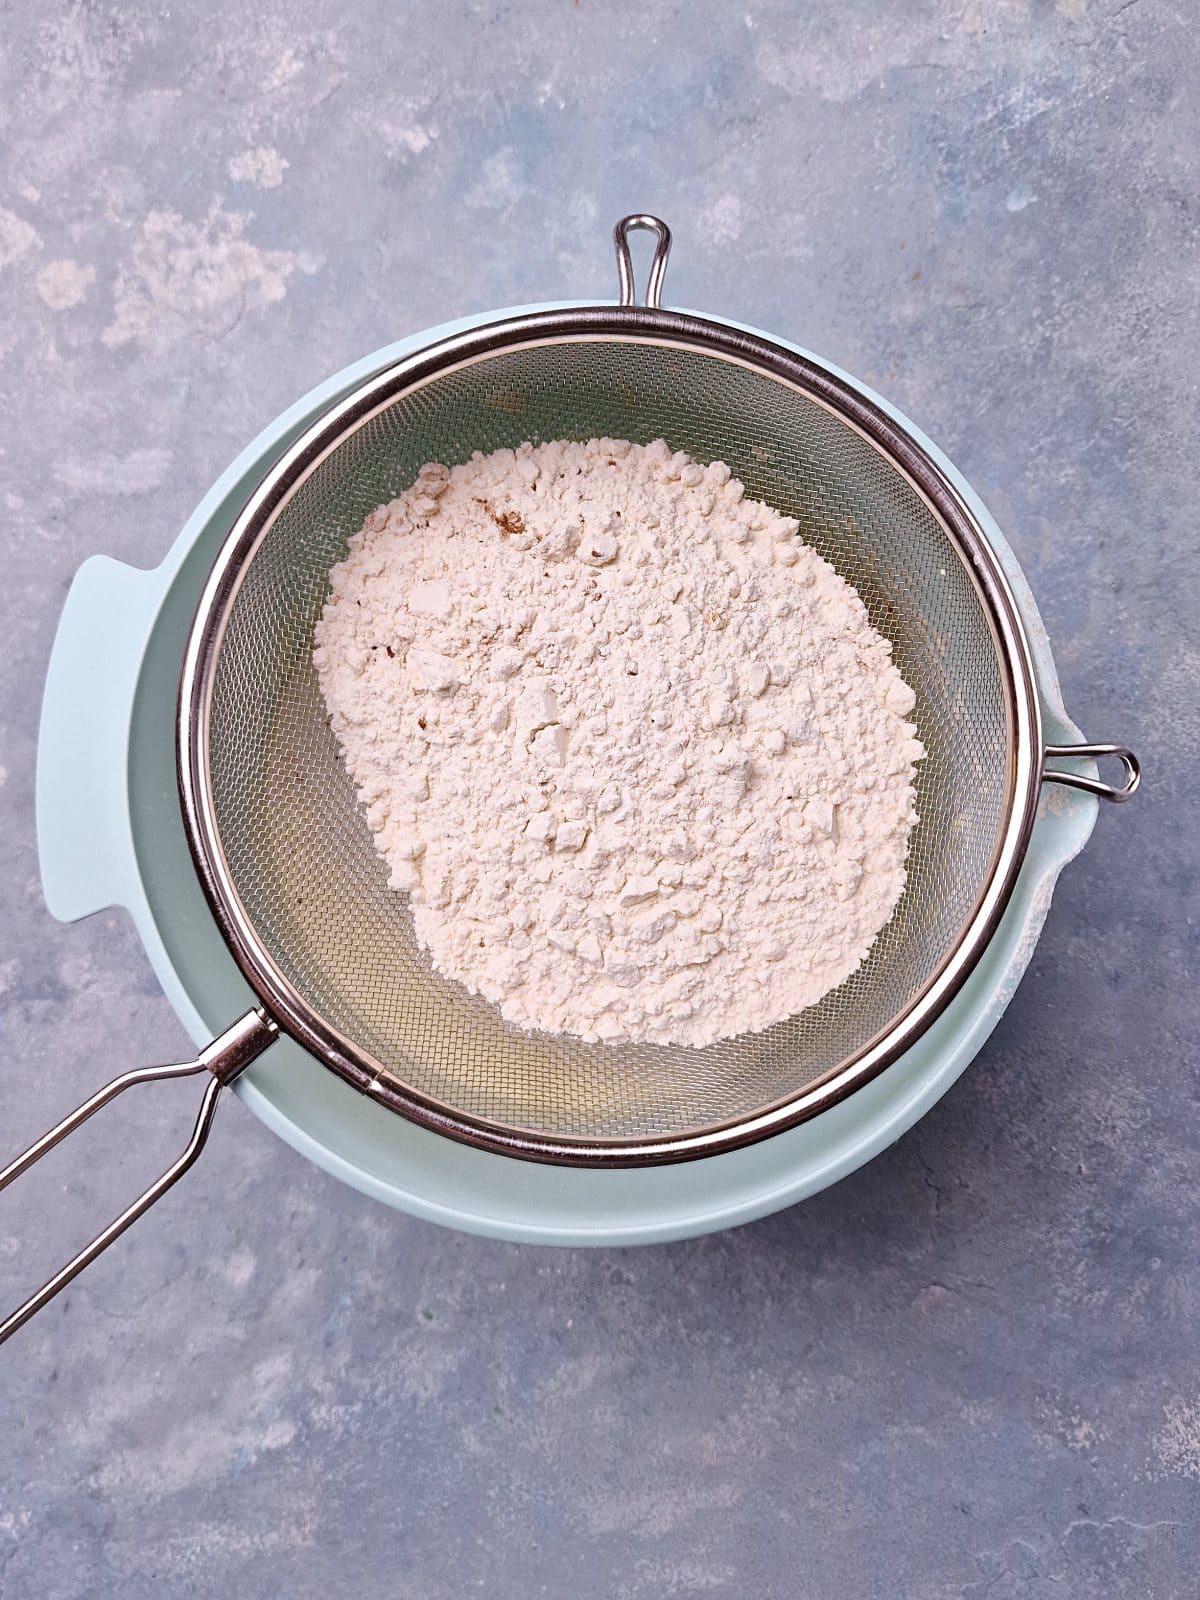 Sieving flour in a fluffy egg mixture. 